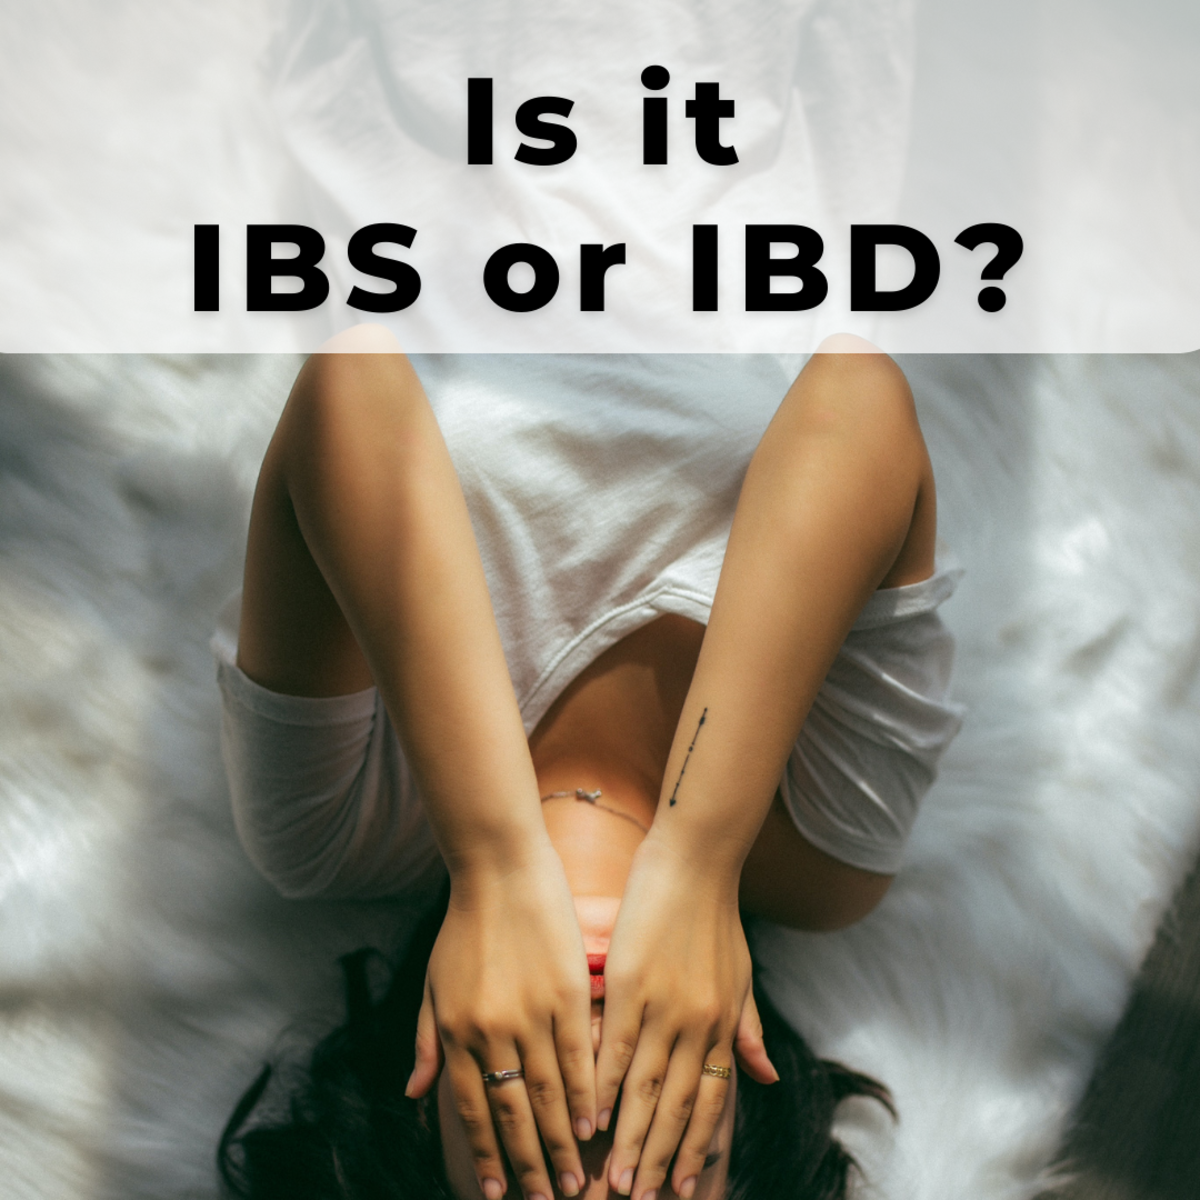 Irritable bowel syndrome and inflammatory bowel disease both affect the digestive system. While both can be quite distressing and even debilitating, they are quite different entities.